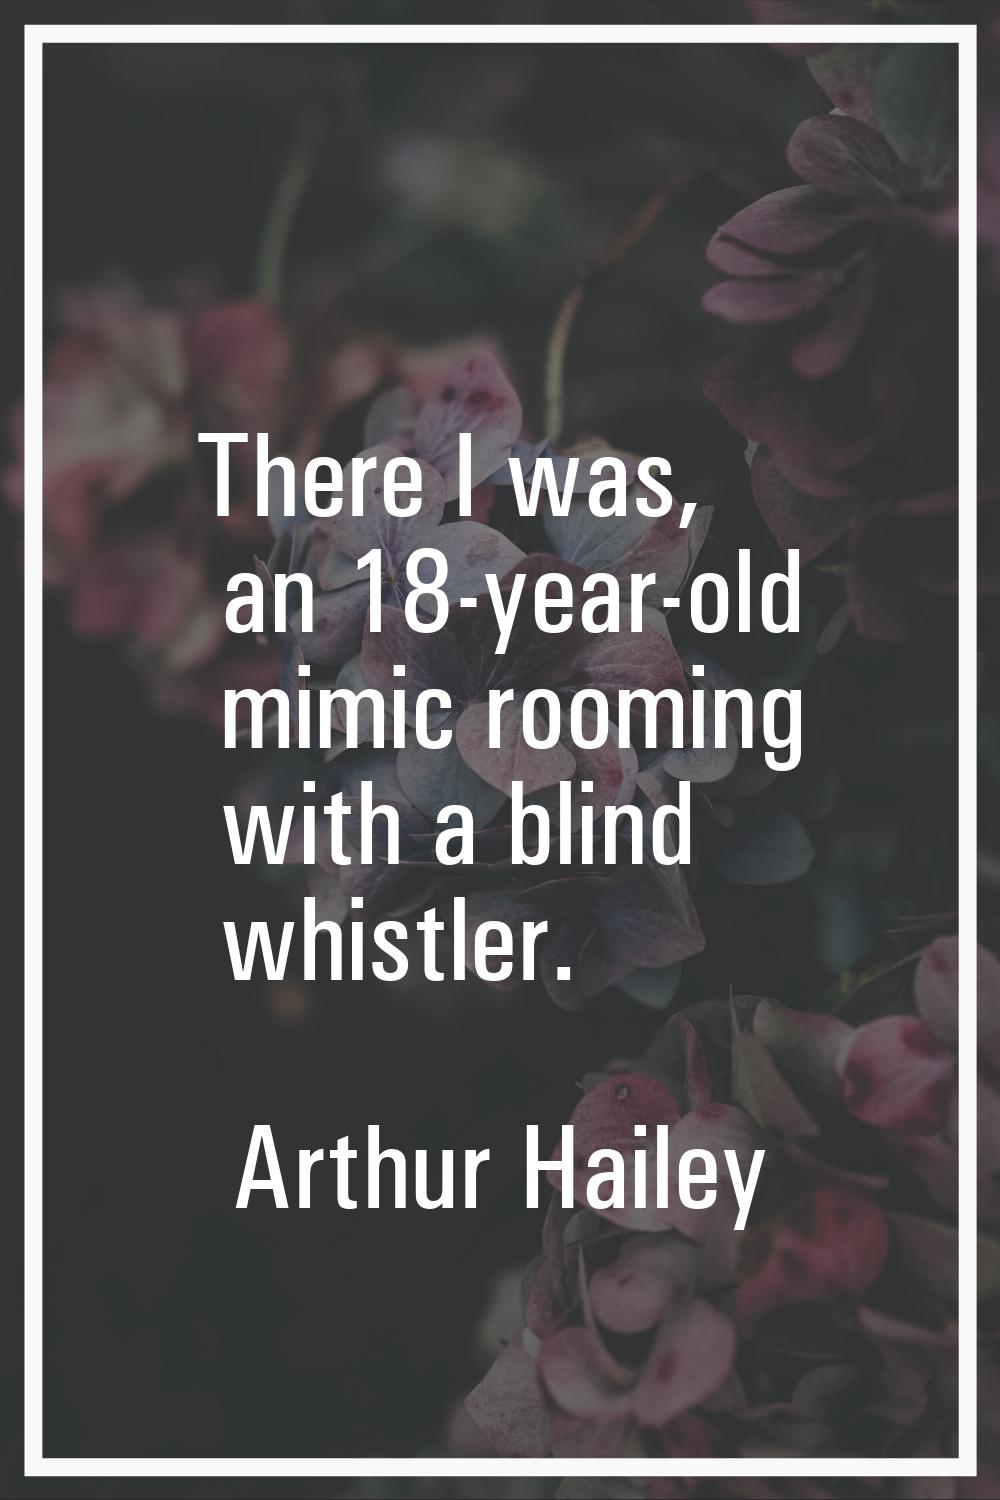 There I was, an 18-year-old mimic rooming with a blind whistler.